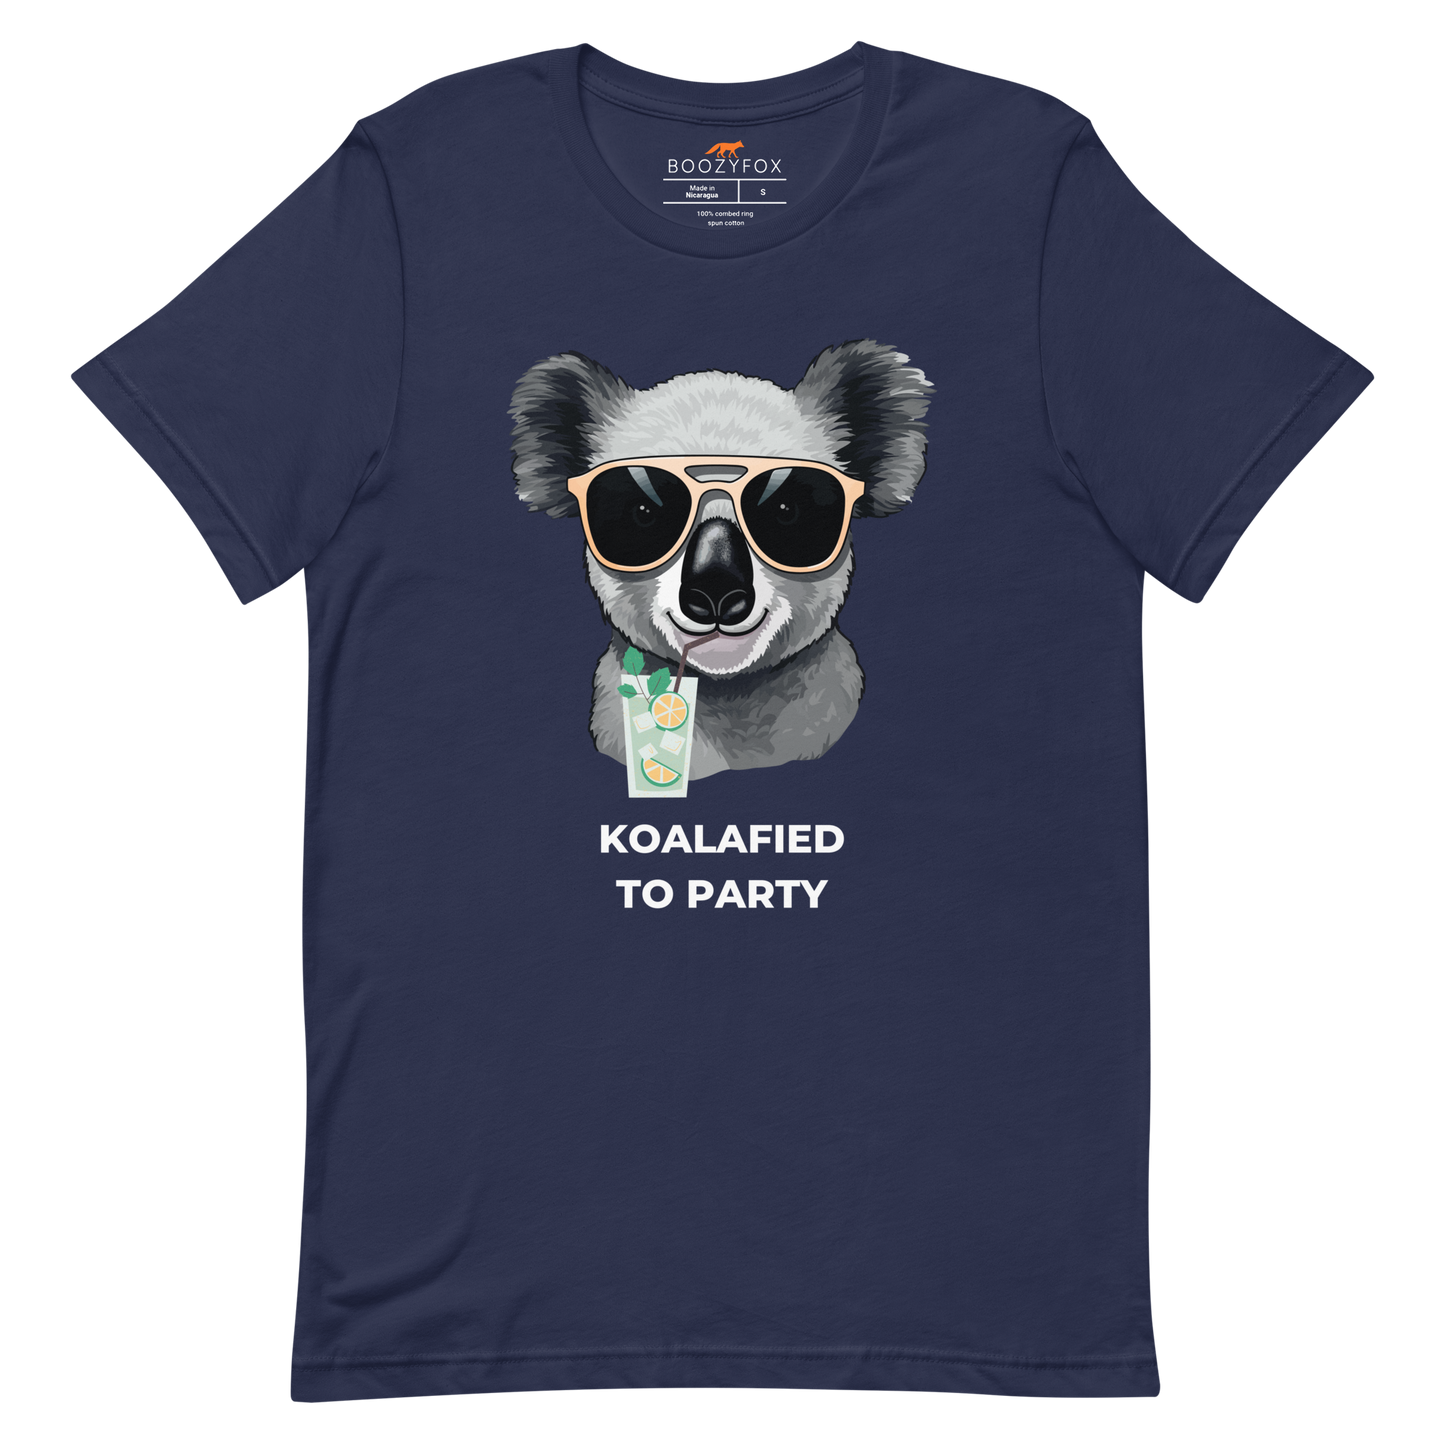 Navy Premium Koala Tee featuring an adorable Koalafied To Party graphic on the chest - Funny Graphic Koala Tees - Boozy Fox